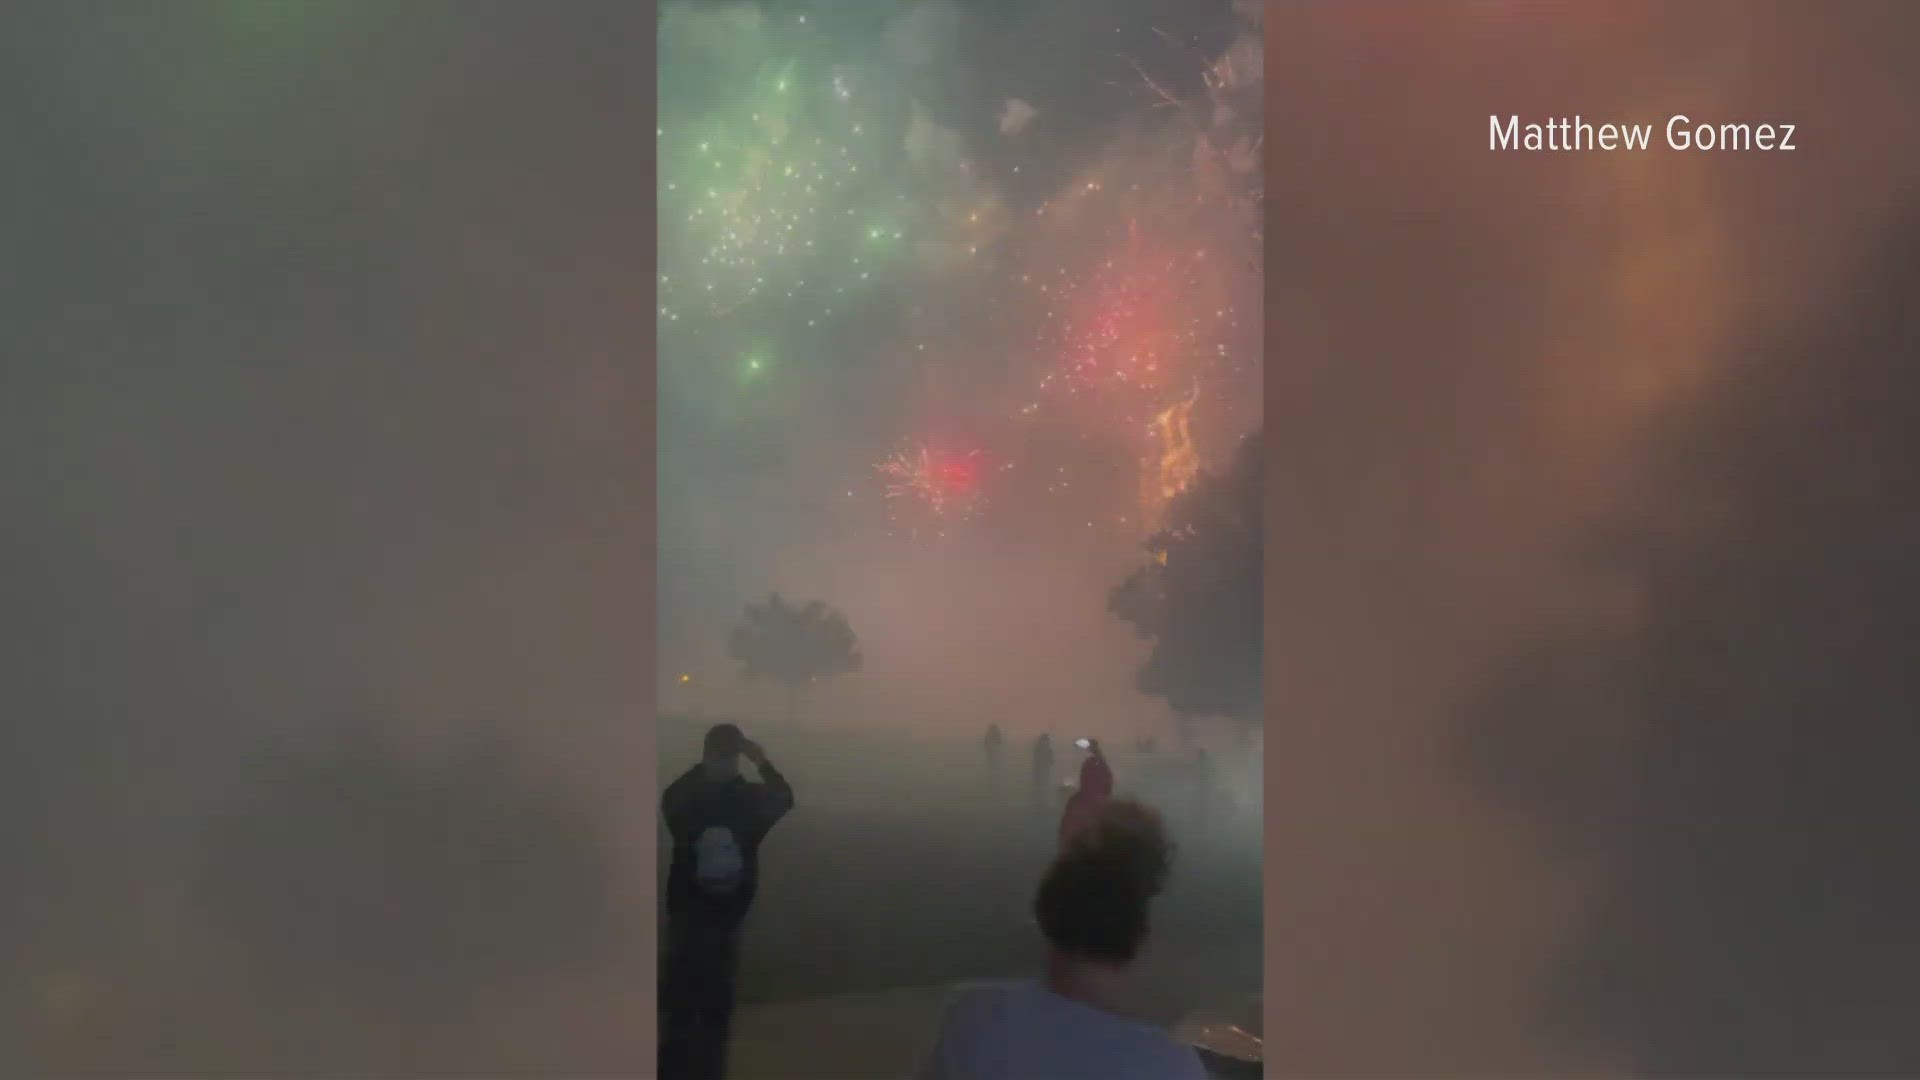 A peaceful neighborhood in Stockton was rocked by a barrage of illegal fireworks at a nearby park.